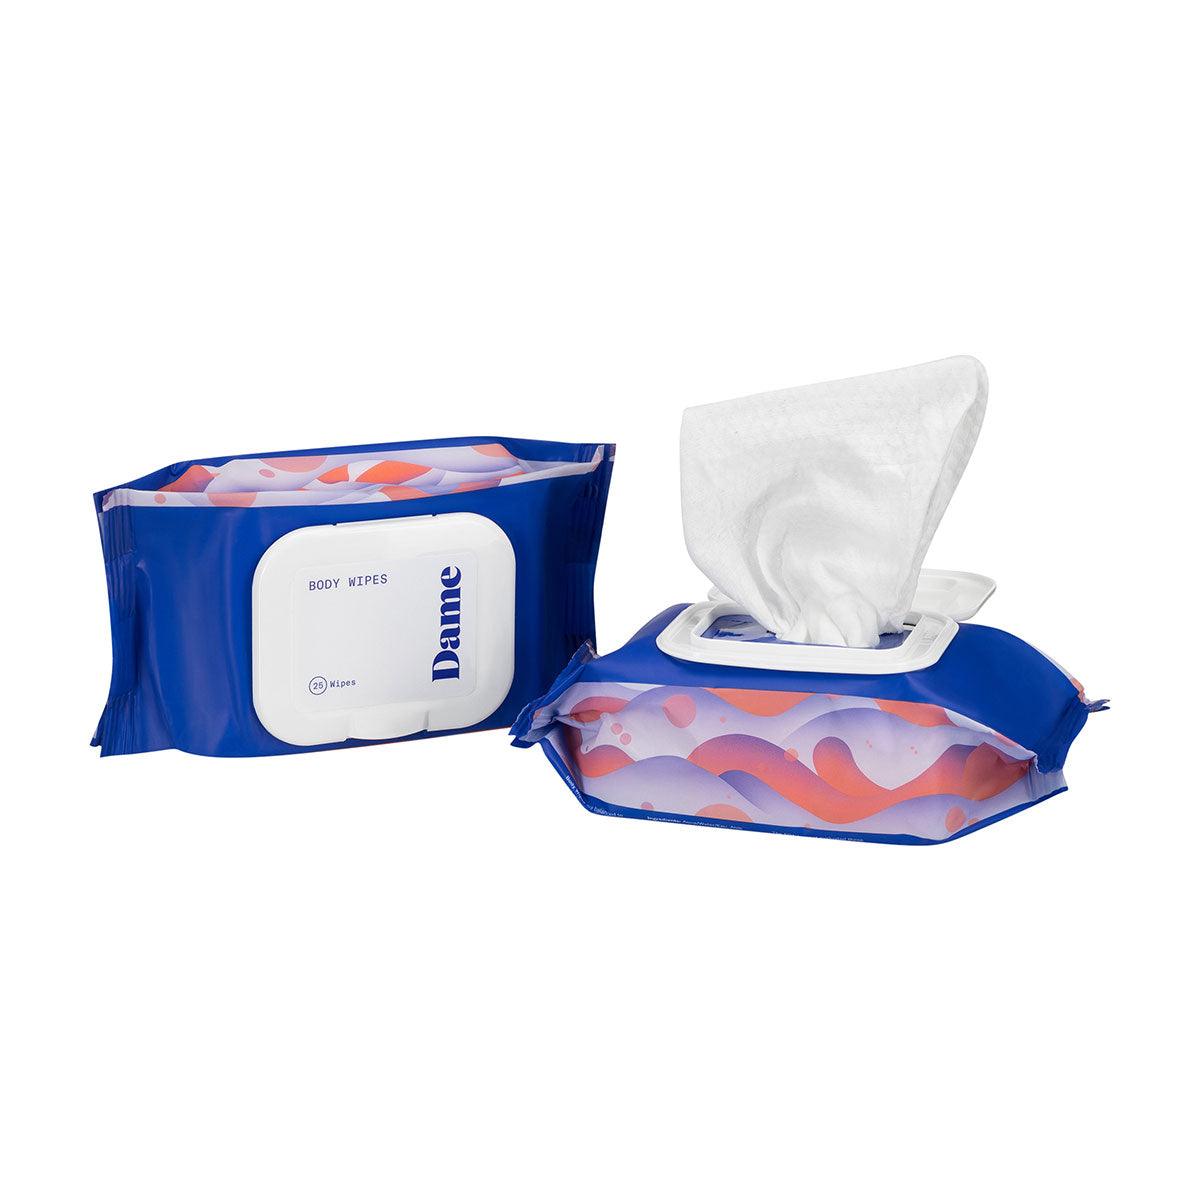 Body Wipes by Dame - 25ct - shop enby